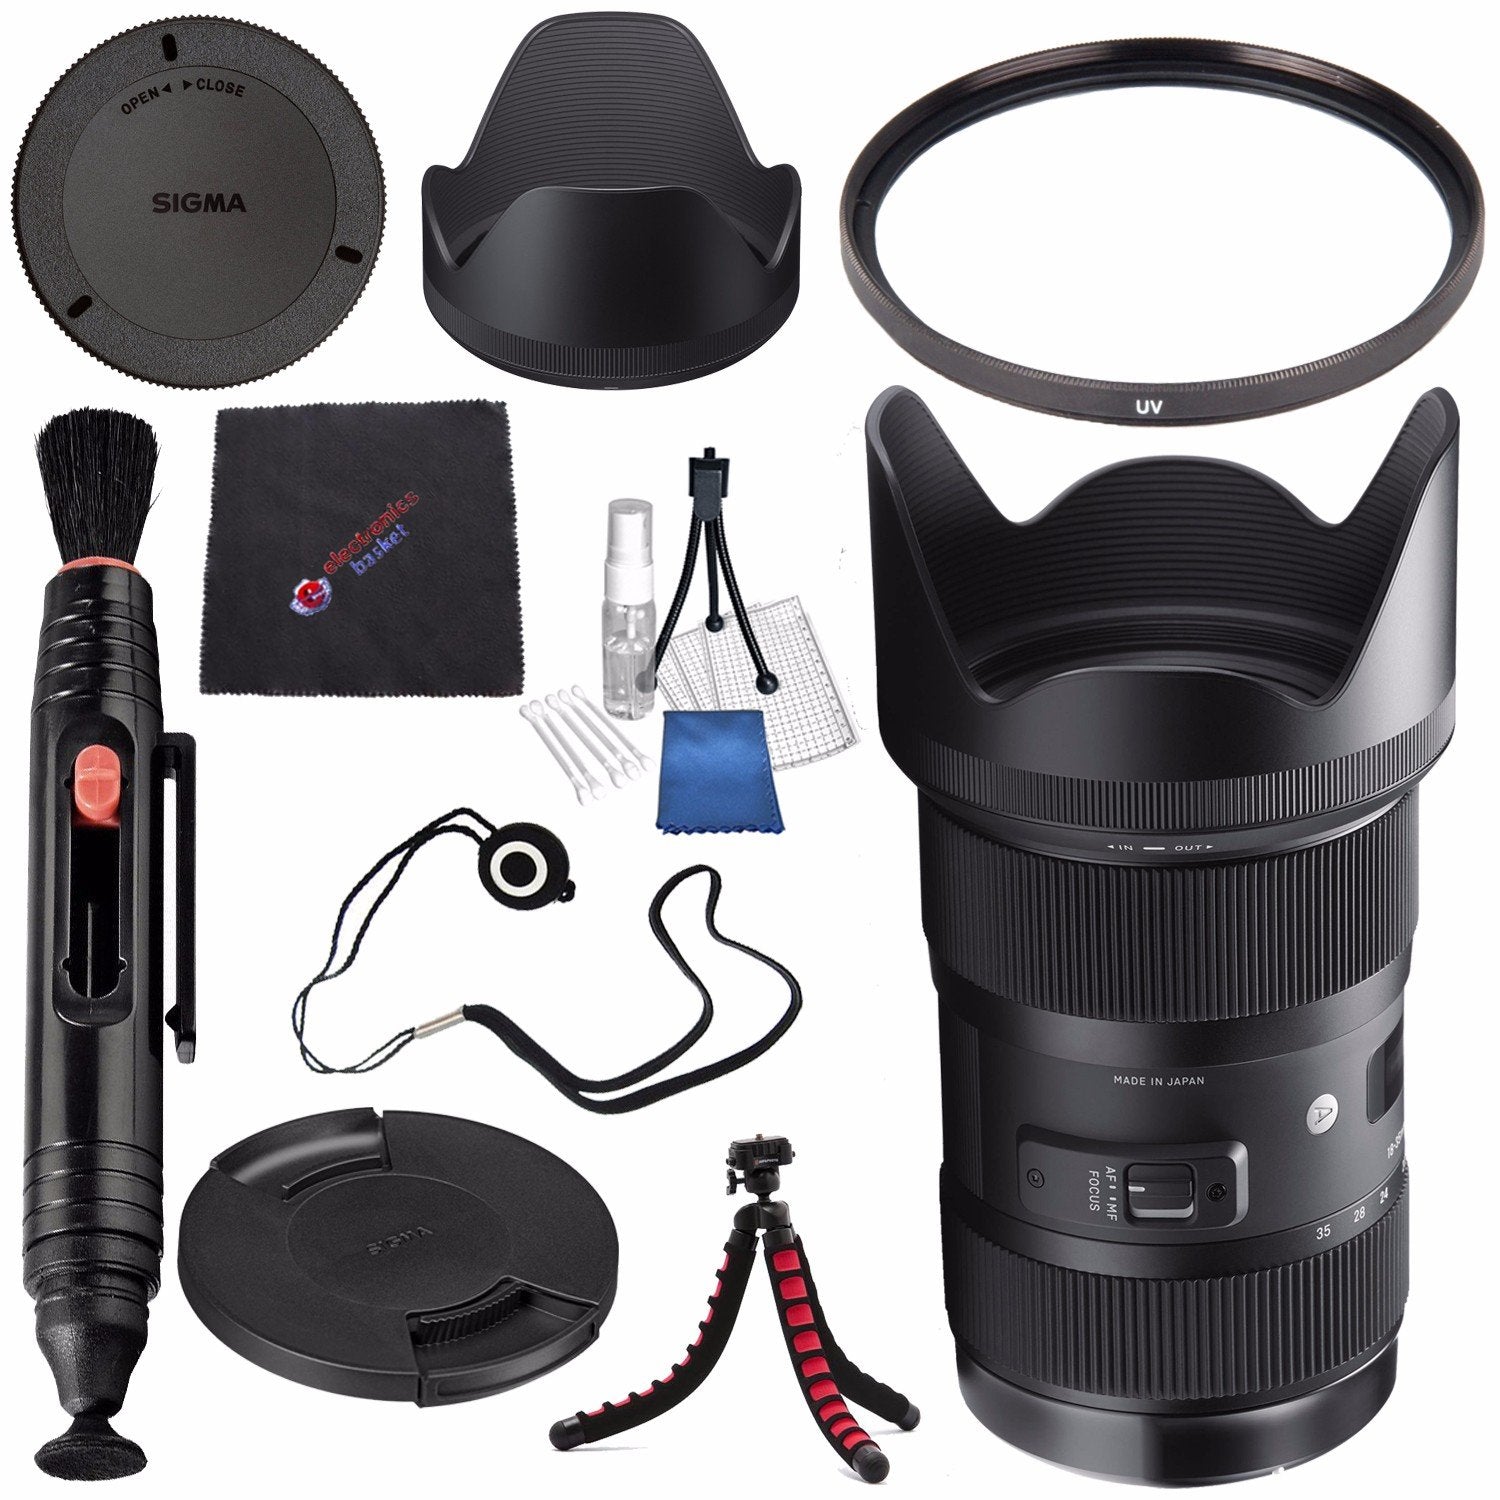 Sigma 18-35mm f/1.8 DC HSM Art Lens for Canon #210101 + Lens Pen Cleaner + Microfiber Cleaning Cloth + Lens Capkeeper + Deluxe Cleaning Kit + Flexible Tripod Bundle (International Model No Warranty)